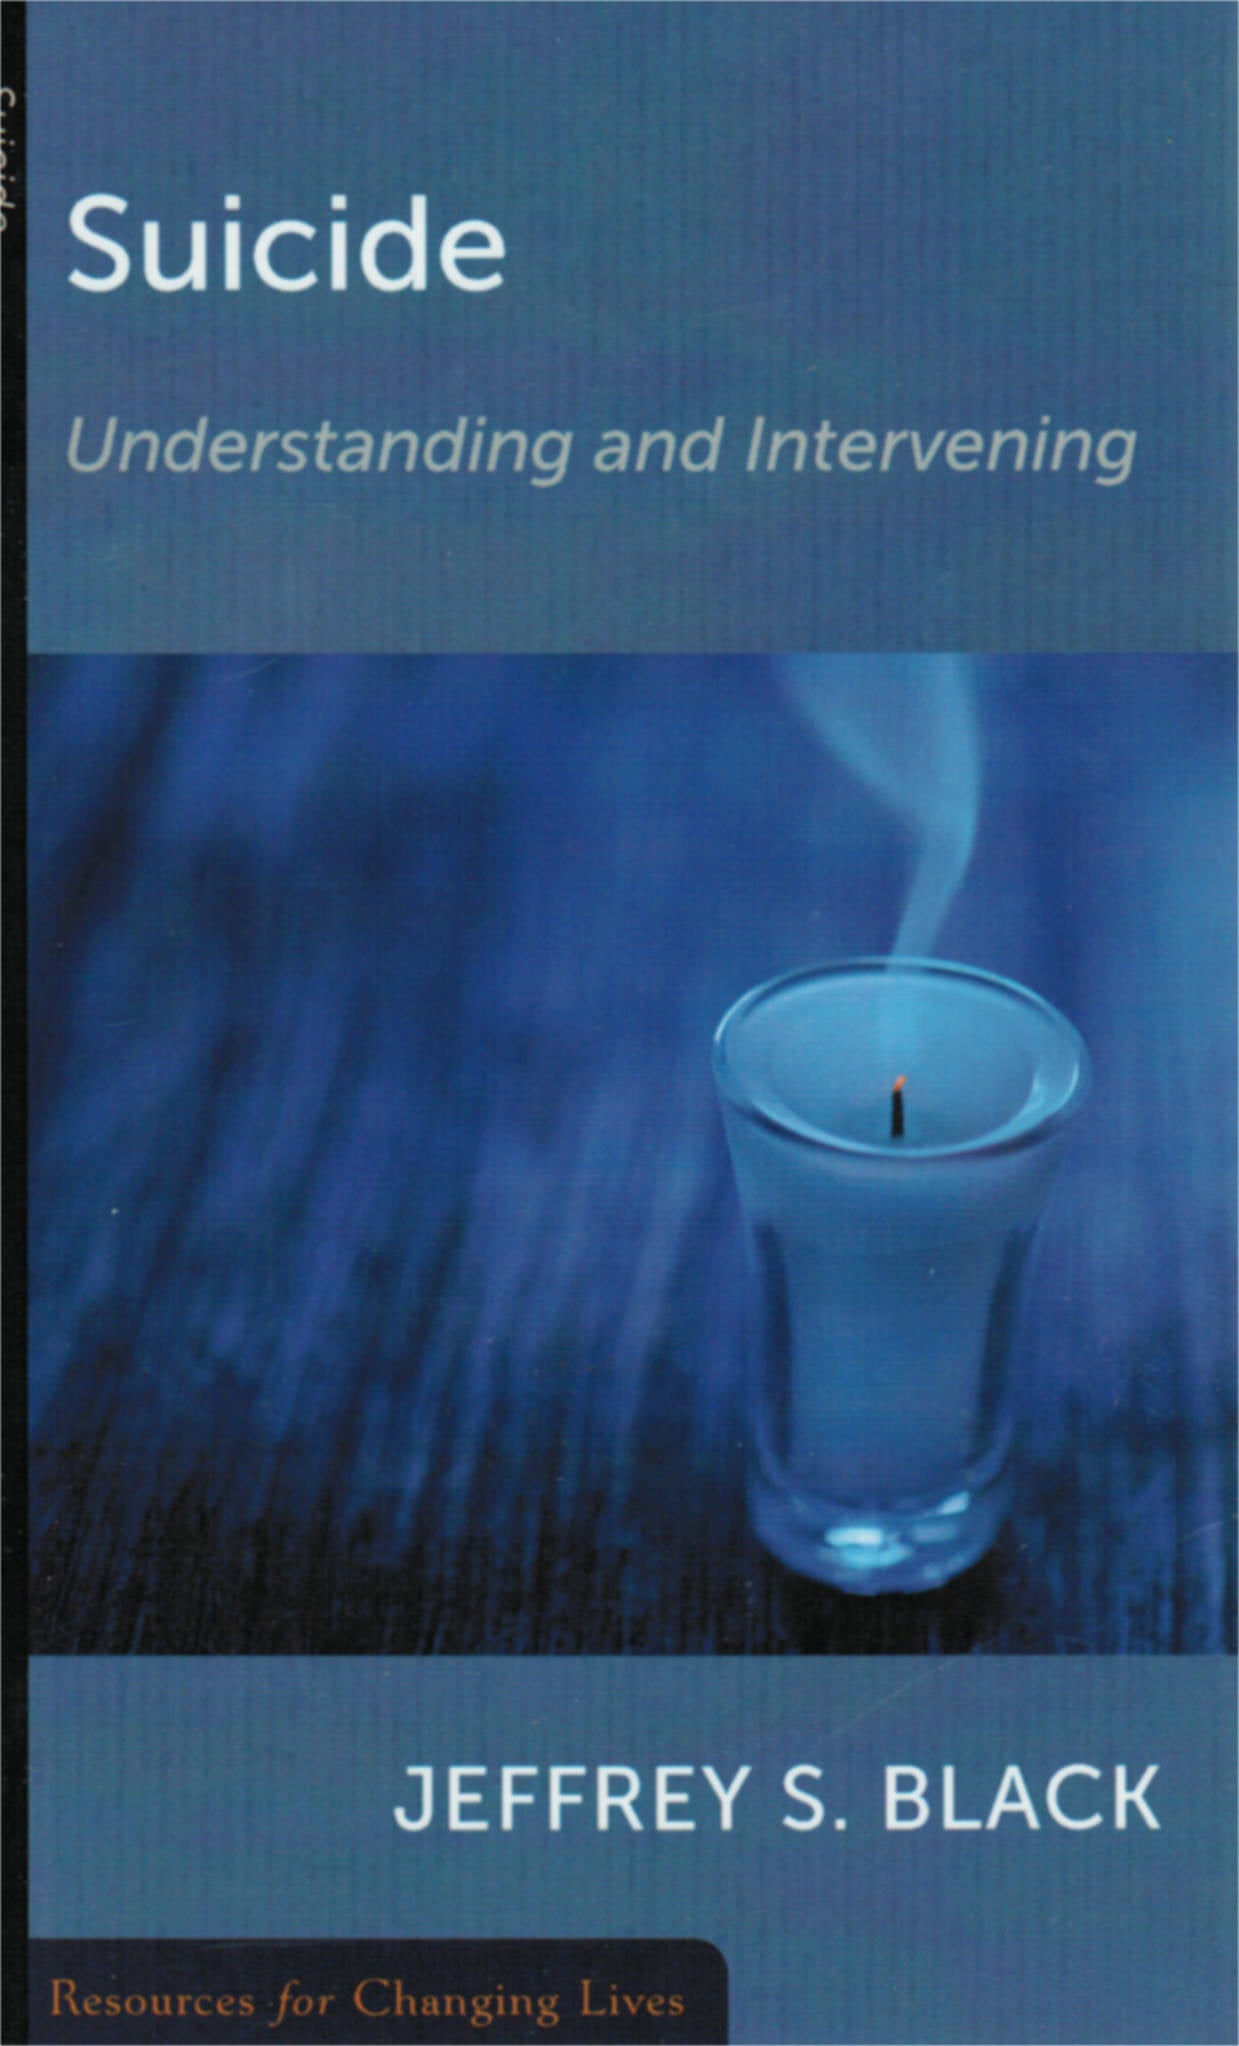 Resources for Changing Lives - Suicide: Understanding and Intervening